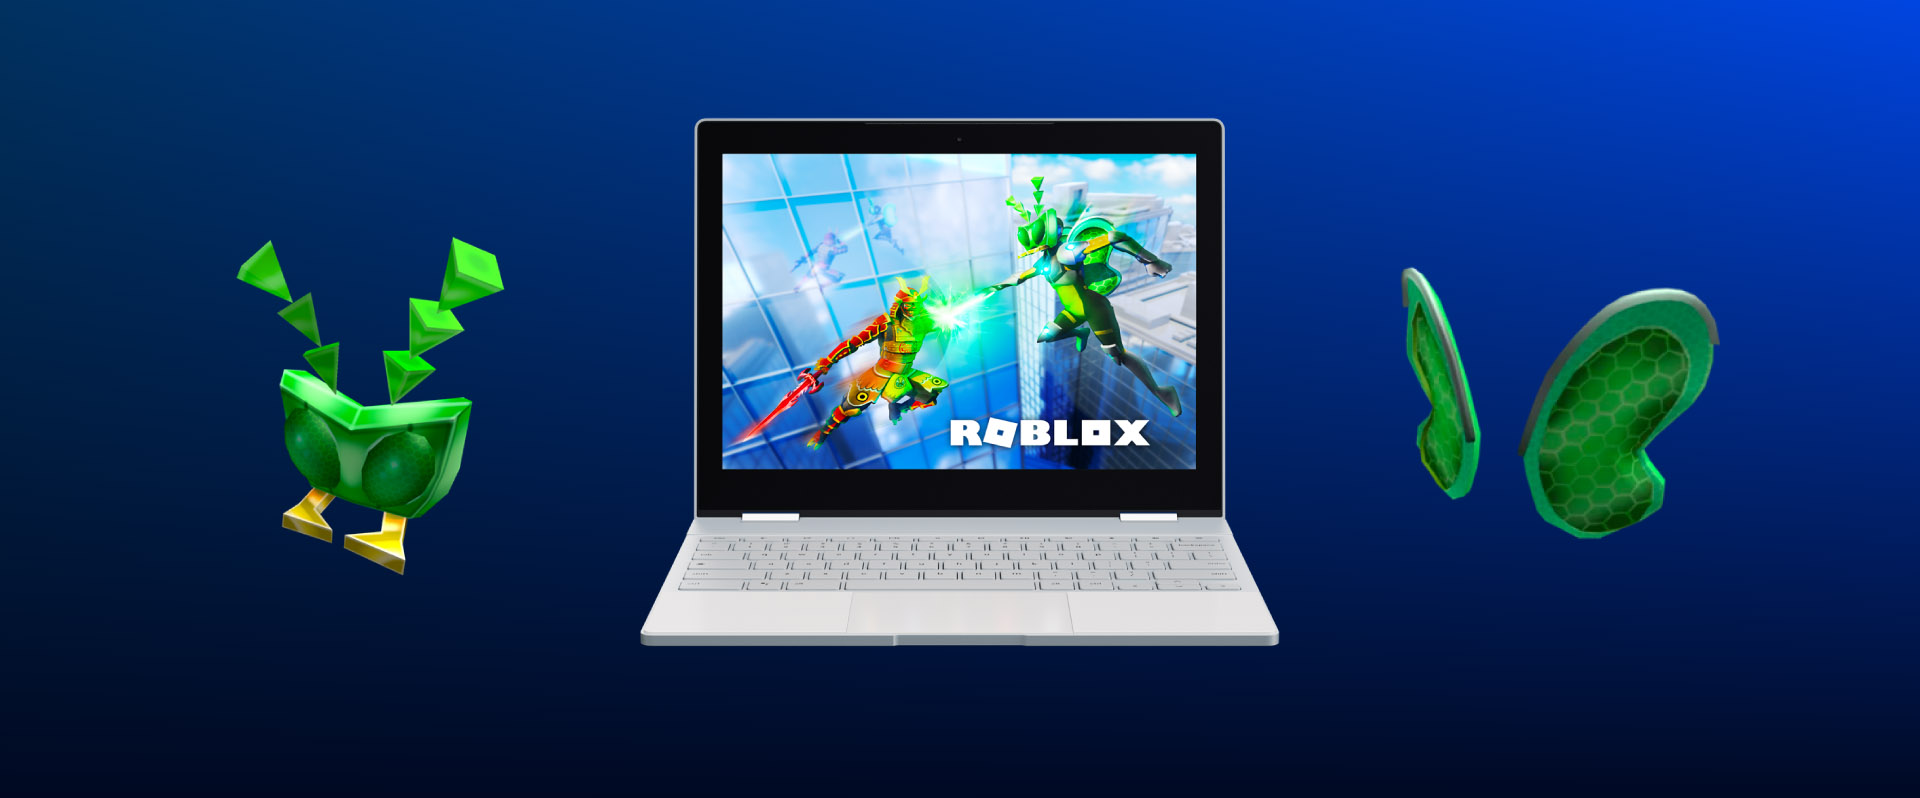 Get the exclusive Cicada Mask + Wings set for free and unlock the ability to fly in Heroes of Robloxia! Offer valid for all Chromebook users. 